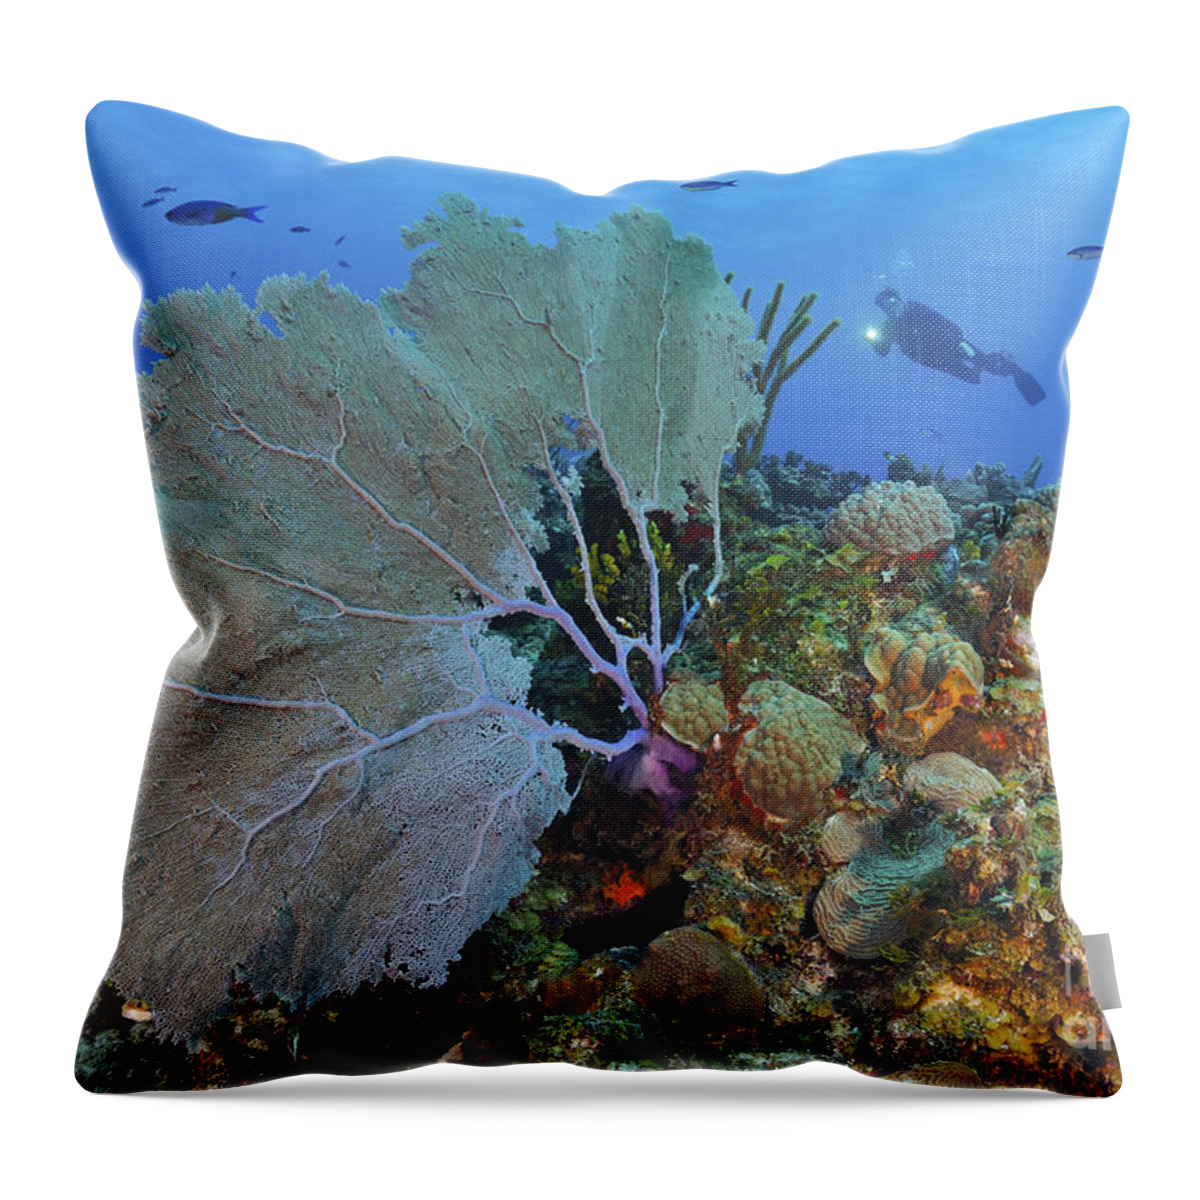 Sea Fans Throw Pillow featuring the photograph A Large Purple Sea Fan On Caribbean by Karen Doody